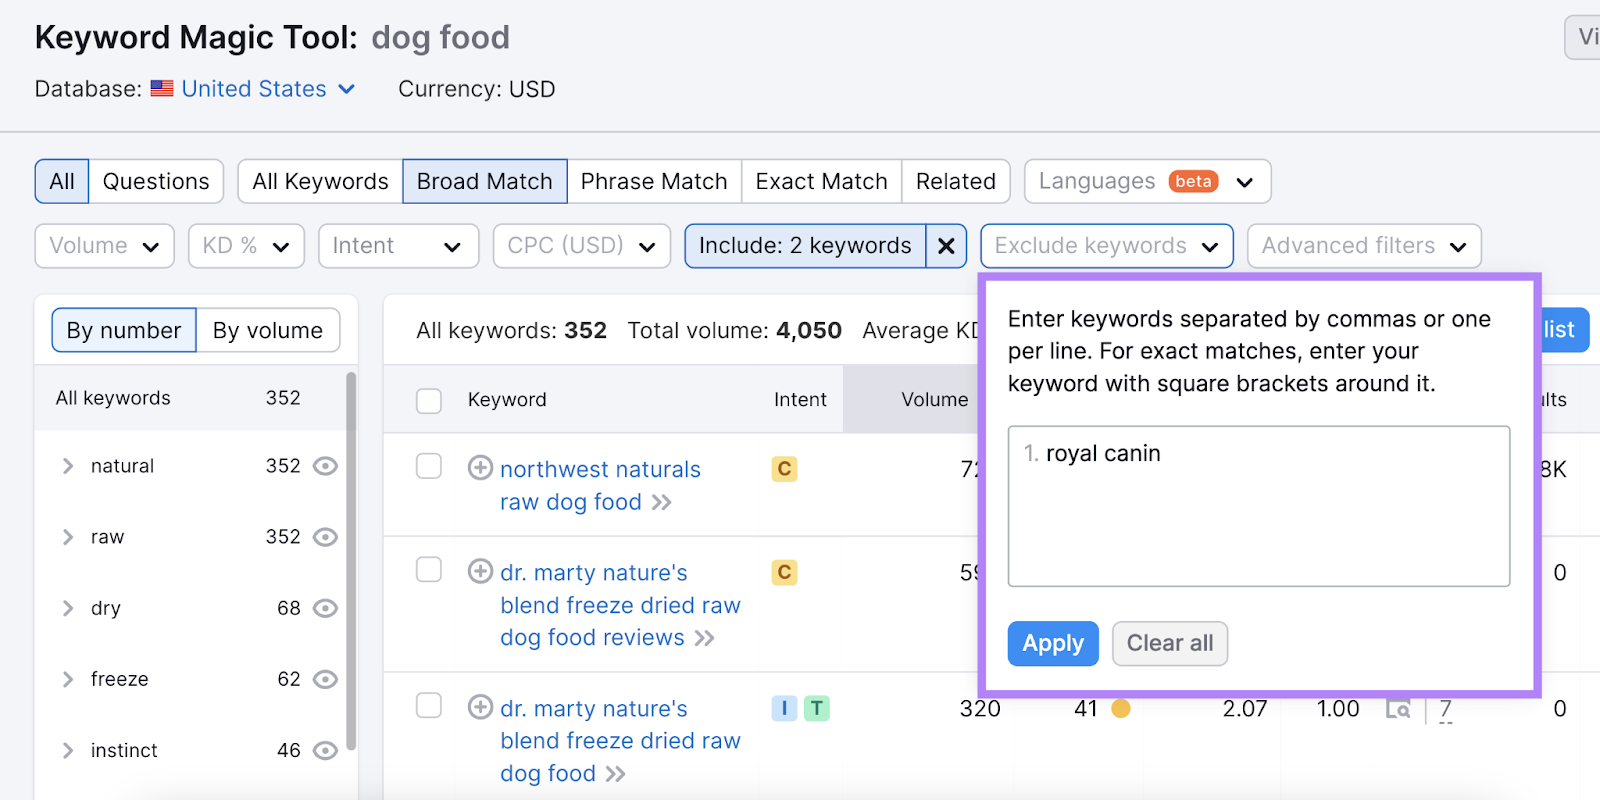 "royal canin" keyword entered nether  the "Exclude keywords" filter successful  Keyword Magic Tool